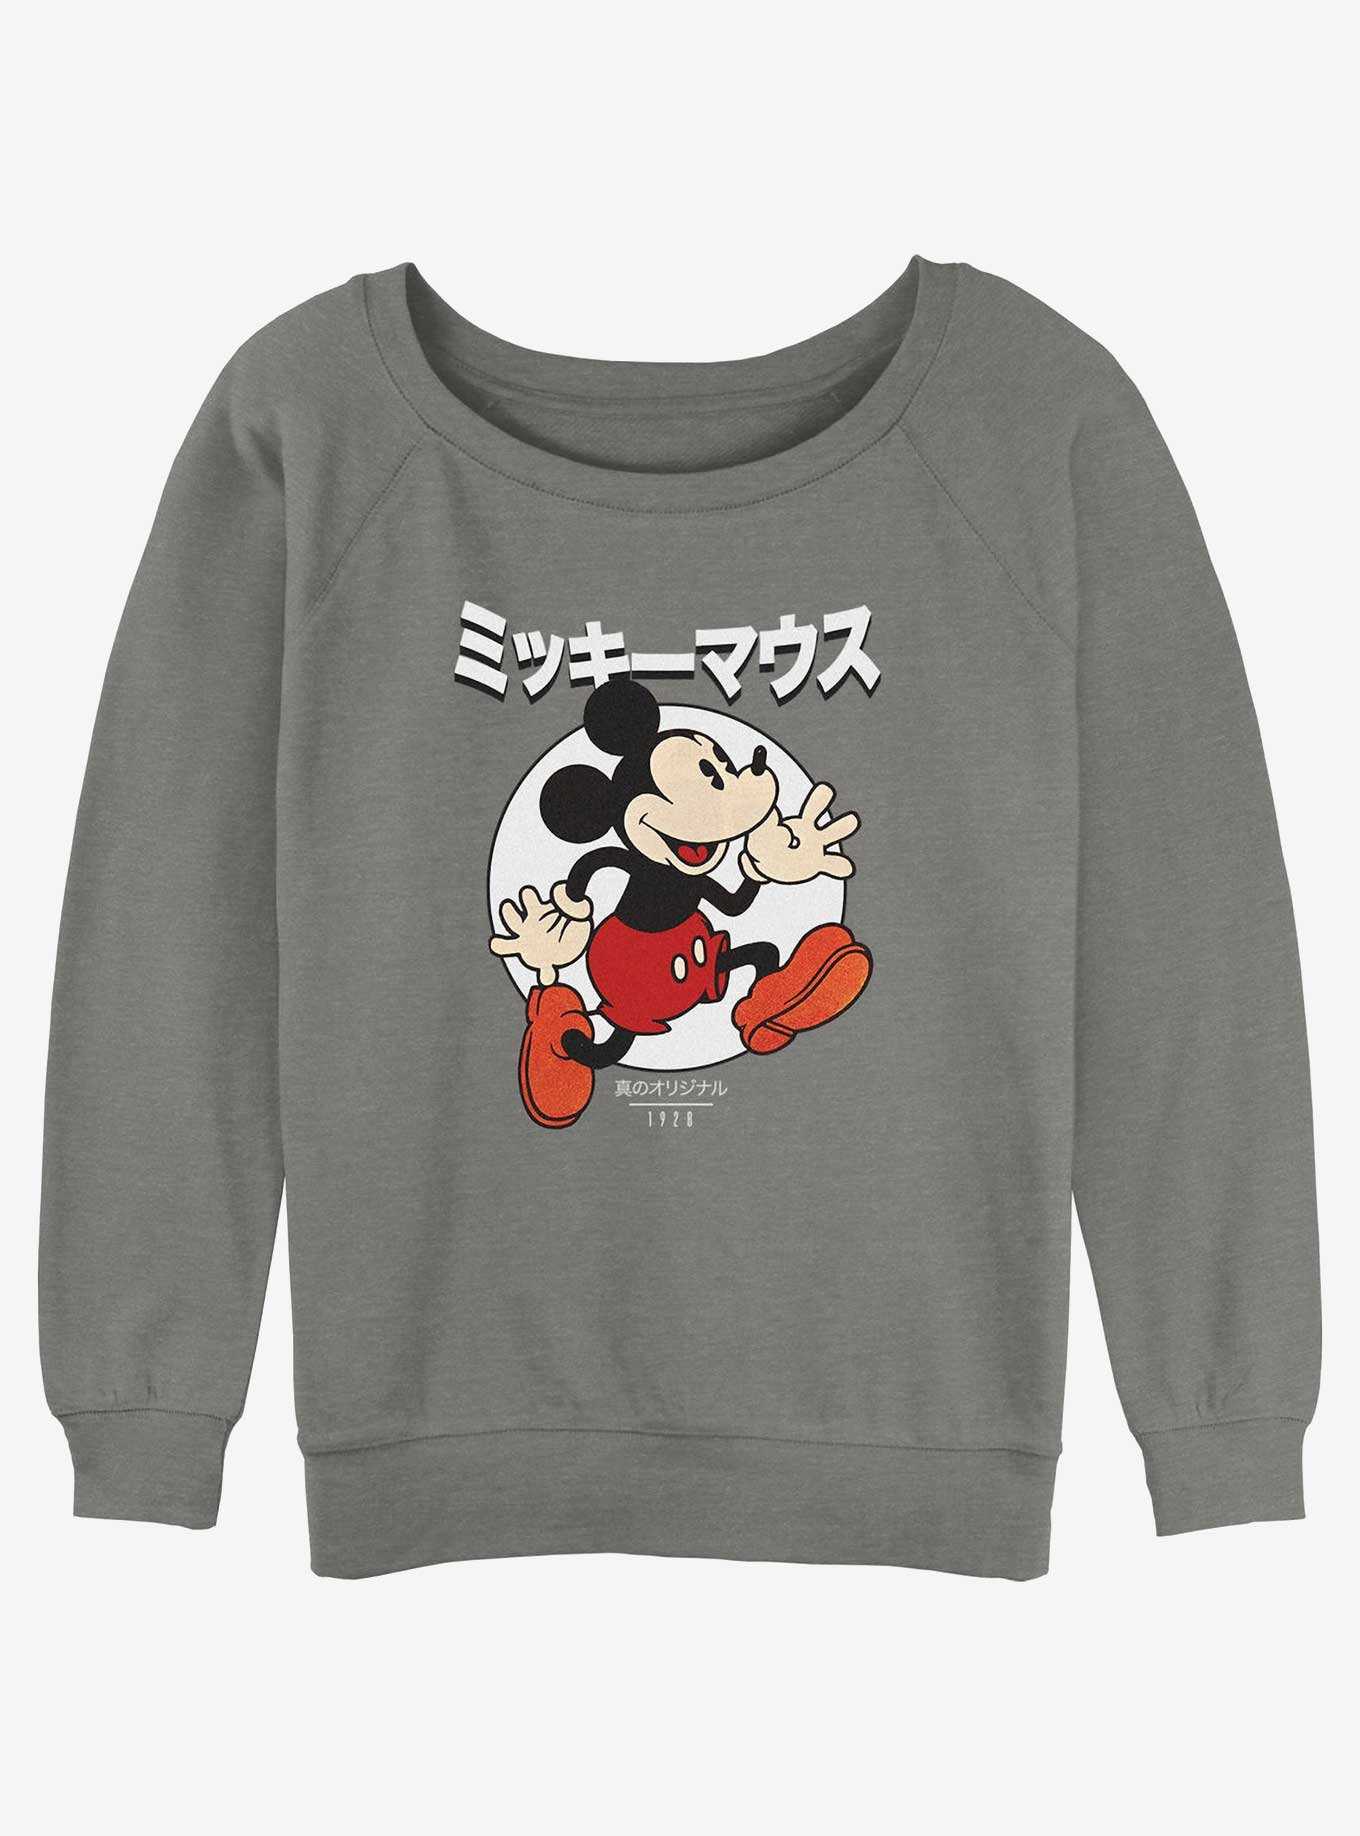 Disney Mickey Mouse Original Mouse in Japanese Girls Slouchy Sweatshirt, , hi-res